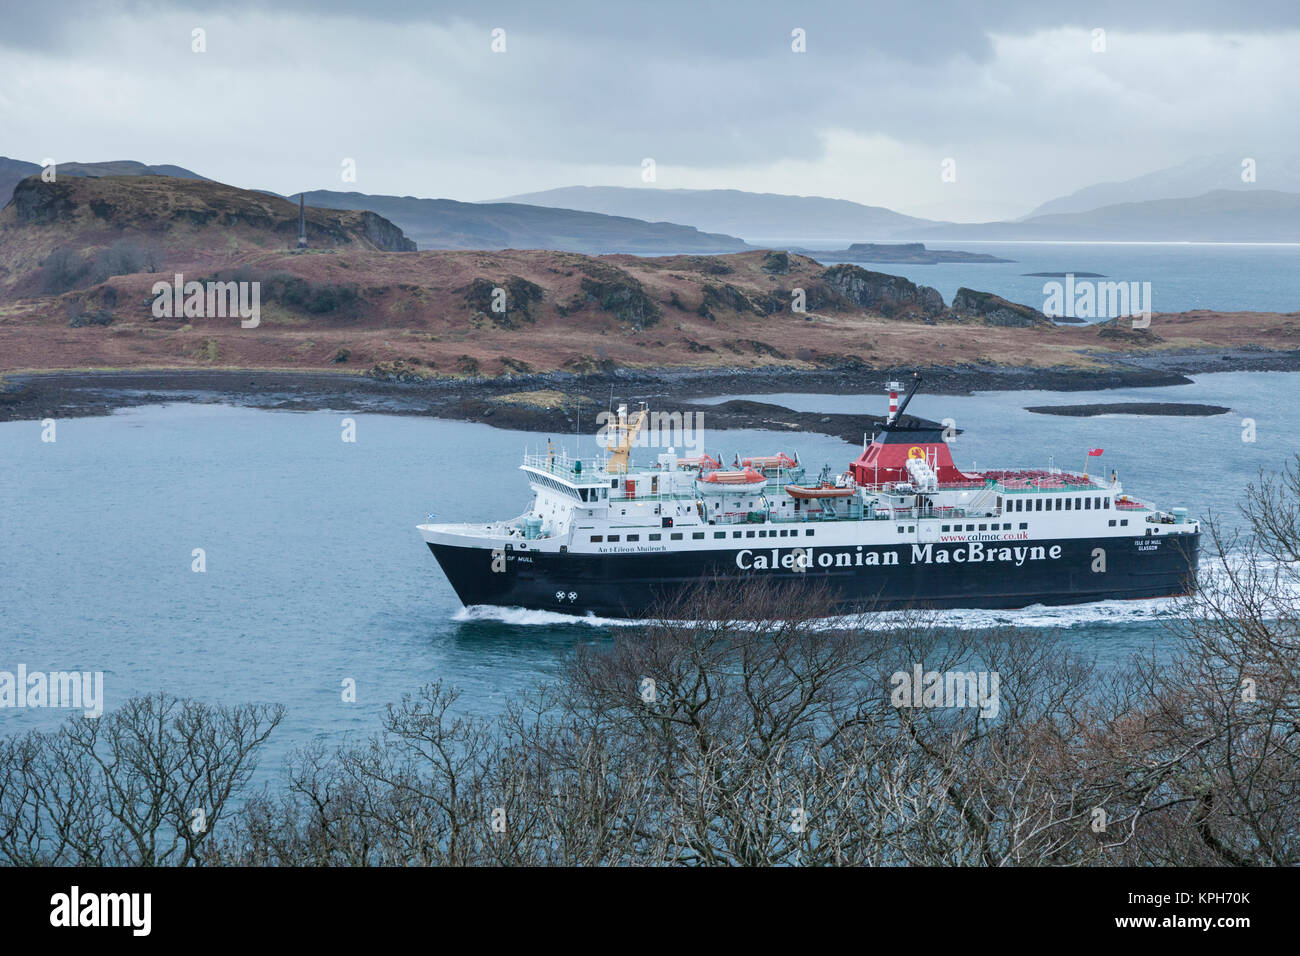 The 'Isle of Mull' Caledonian MacBrayne ferry coming in to Oban on the Firth of Lorne with hills and islands behind. Stock Photo